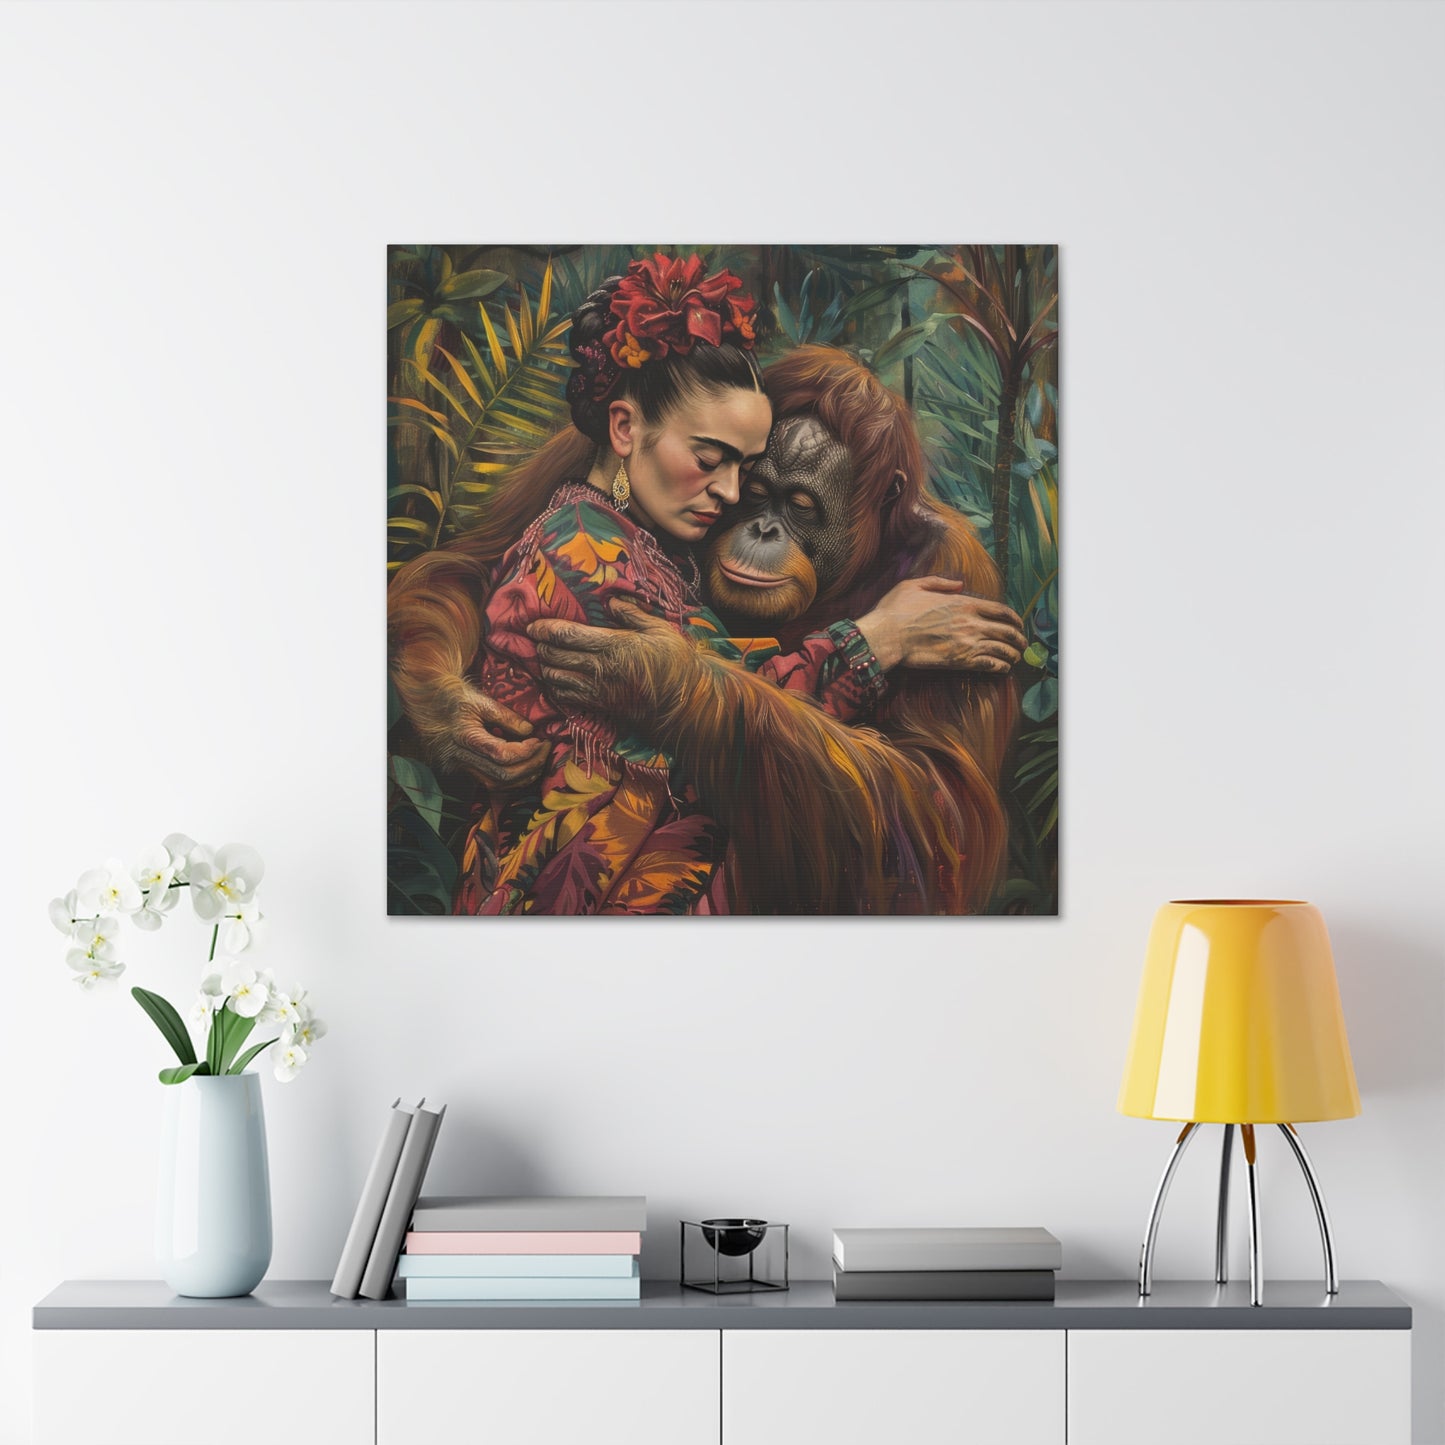 A vibrant David Miller. Embrace of the Wild. Exclusive Canvas Print, displayed above a sideboard with decorative items and books from Printify.